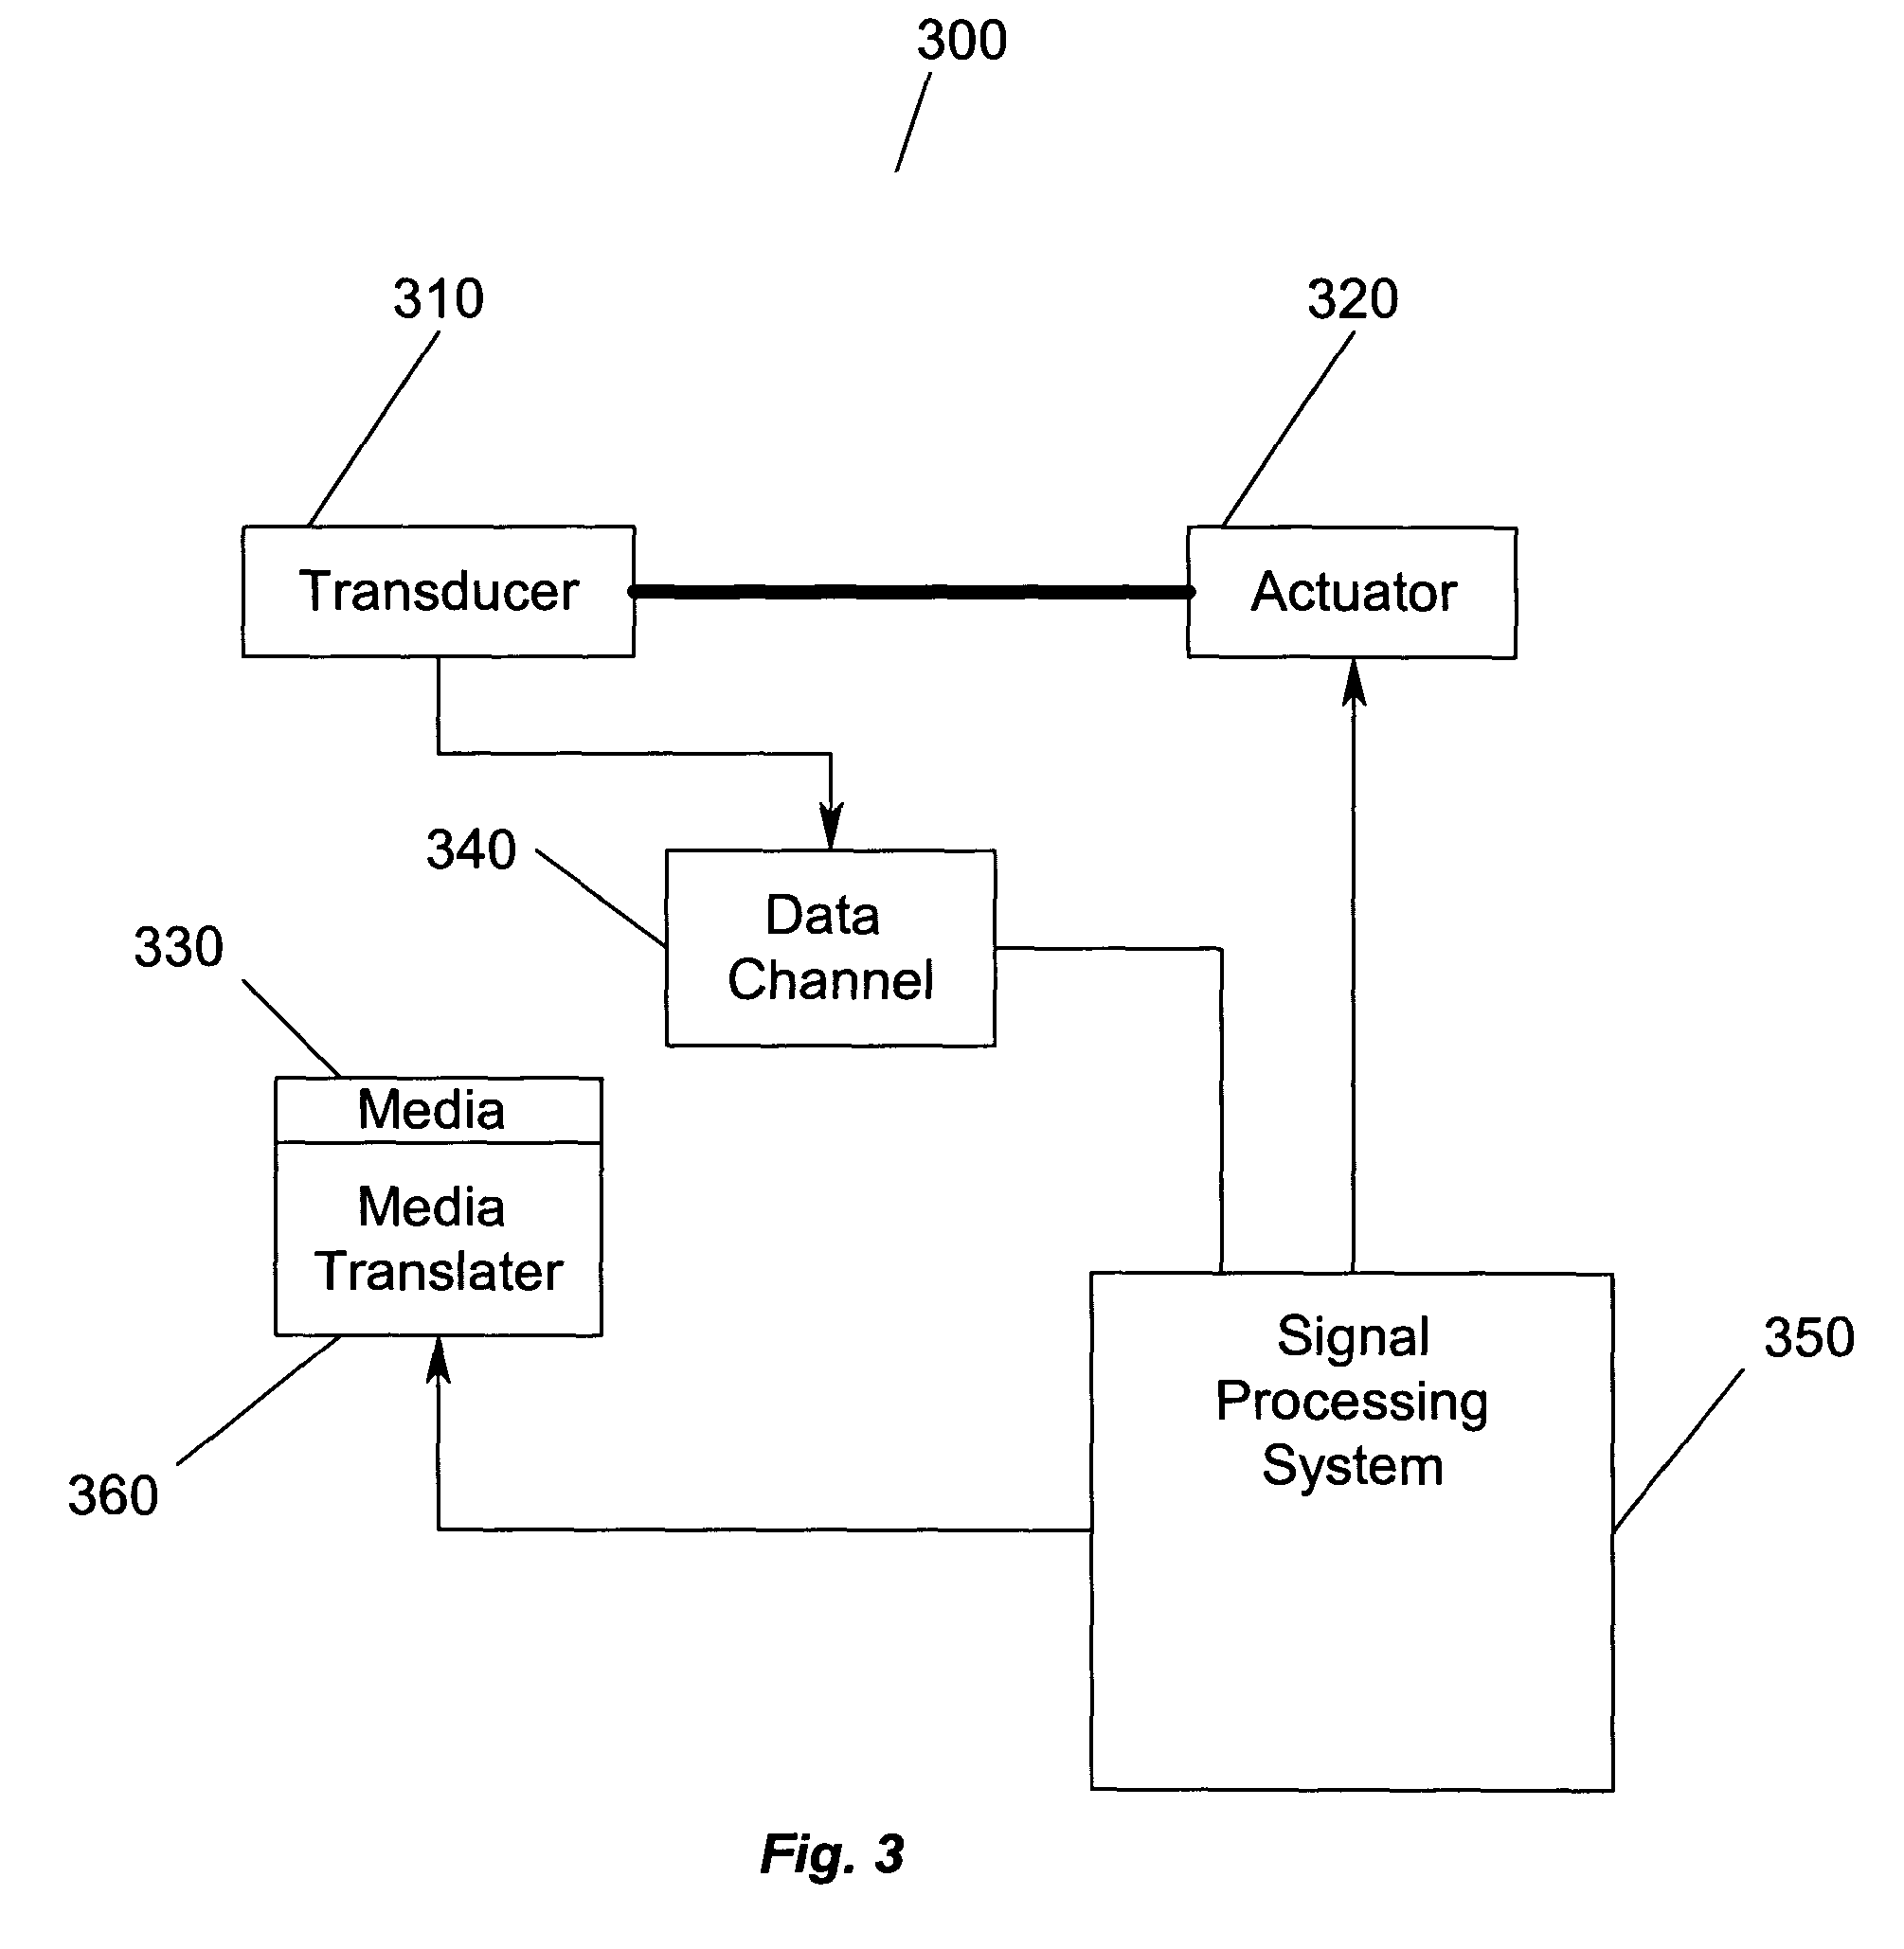 Apparatus for providing transverse magnetic bias proximate to a pole tip to speed up the switching time of the pole-tip during the writing operation